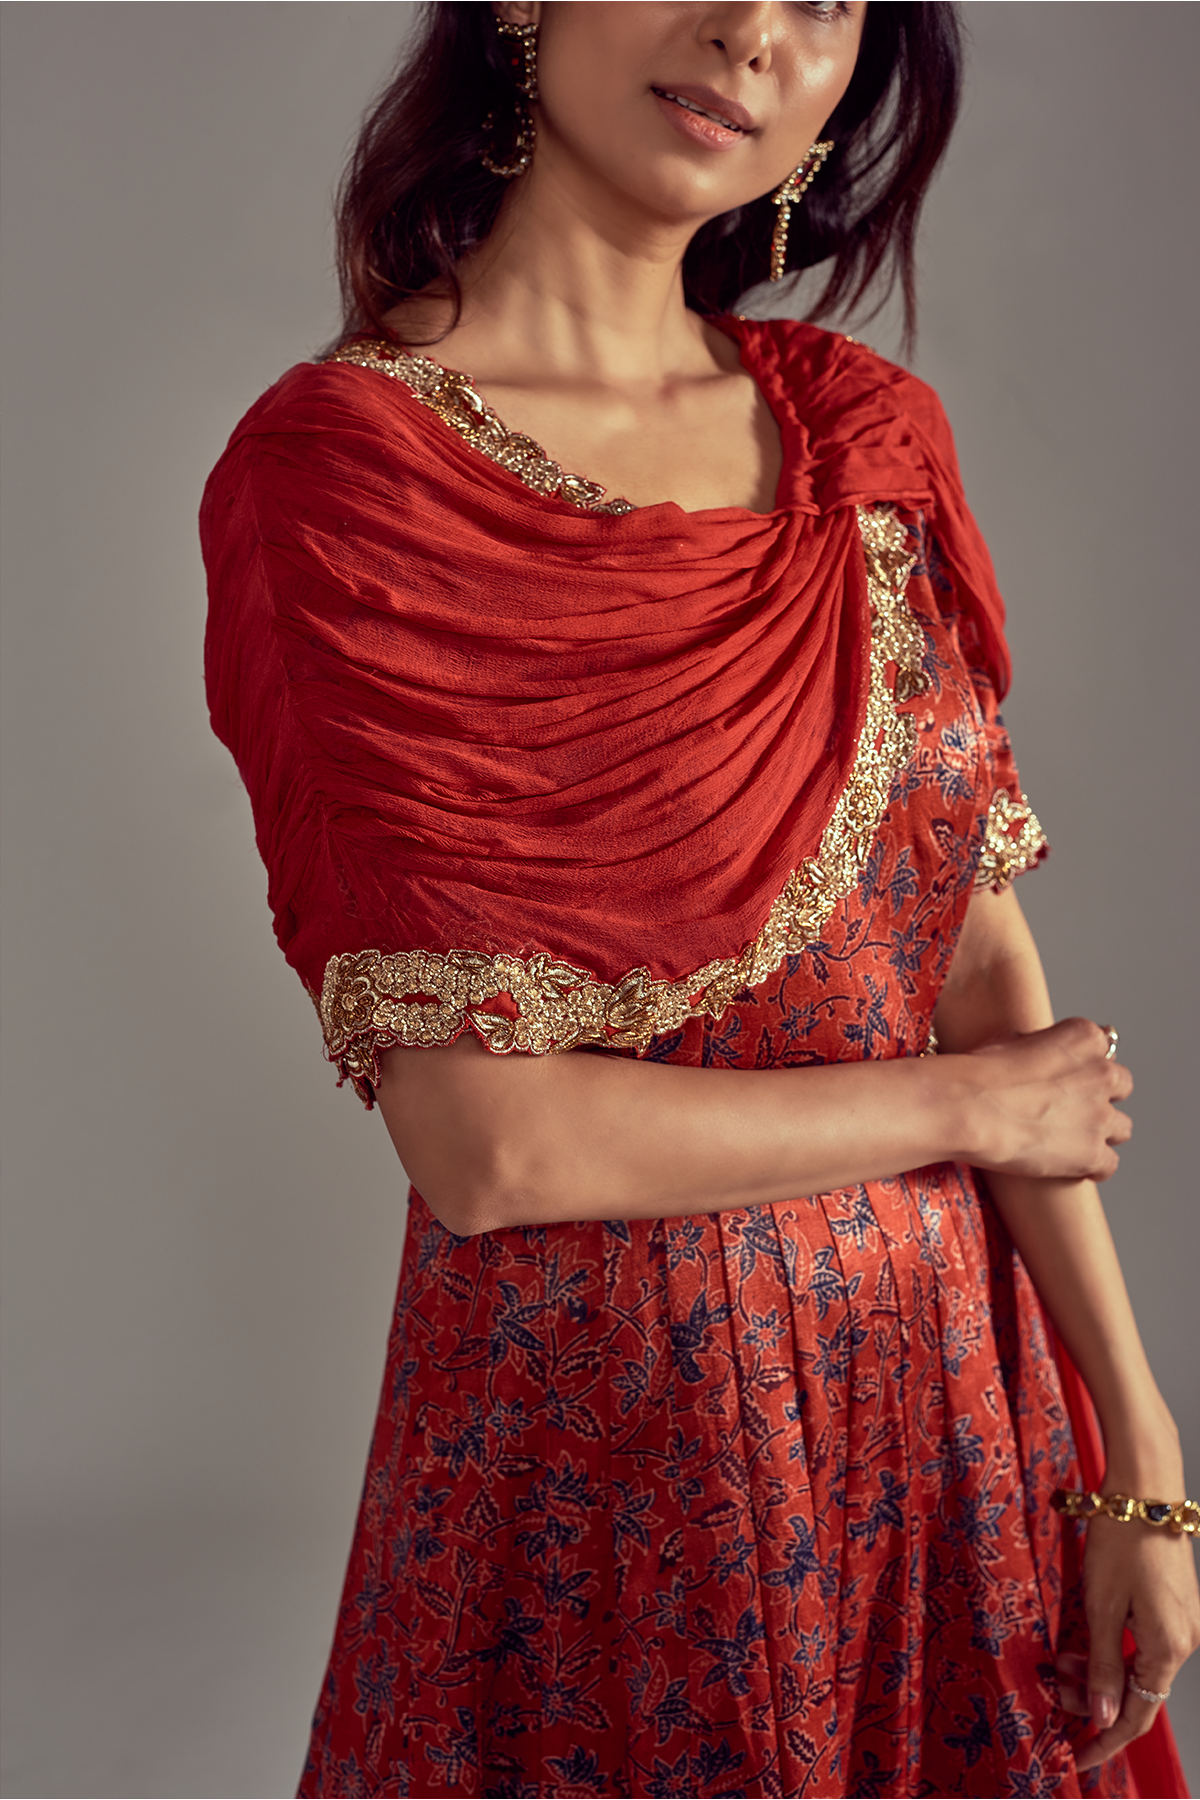 "Stunning Scarlet Red Mashru Silk Ajrakh Anarkali with Heavy Embroidered Border, enhanced with a Draped Dupatta and Belt for a regal look."